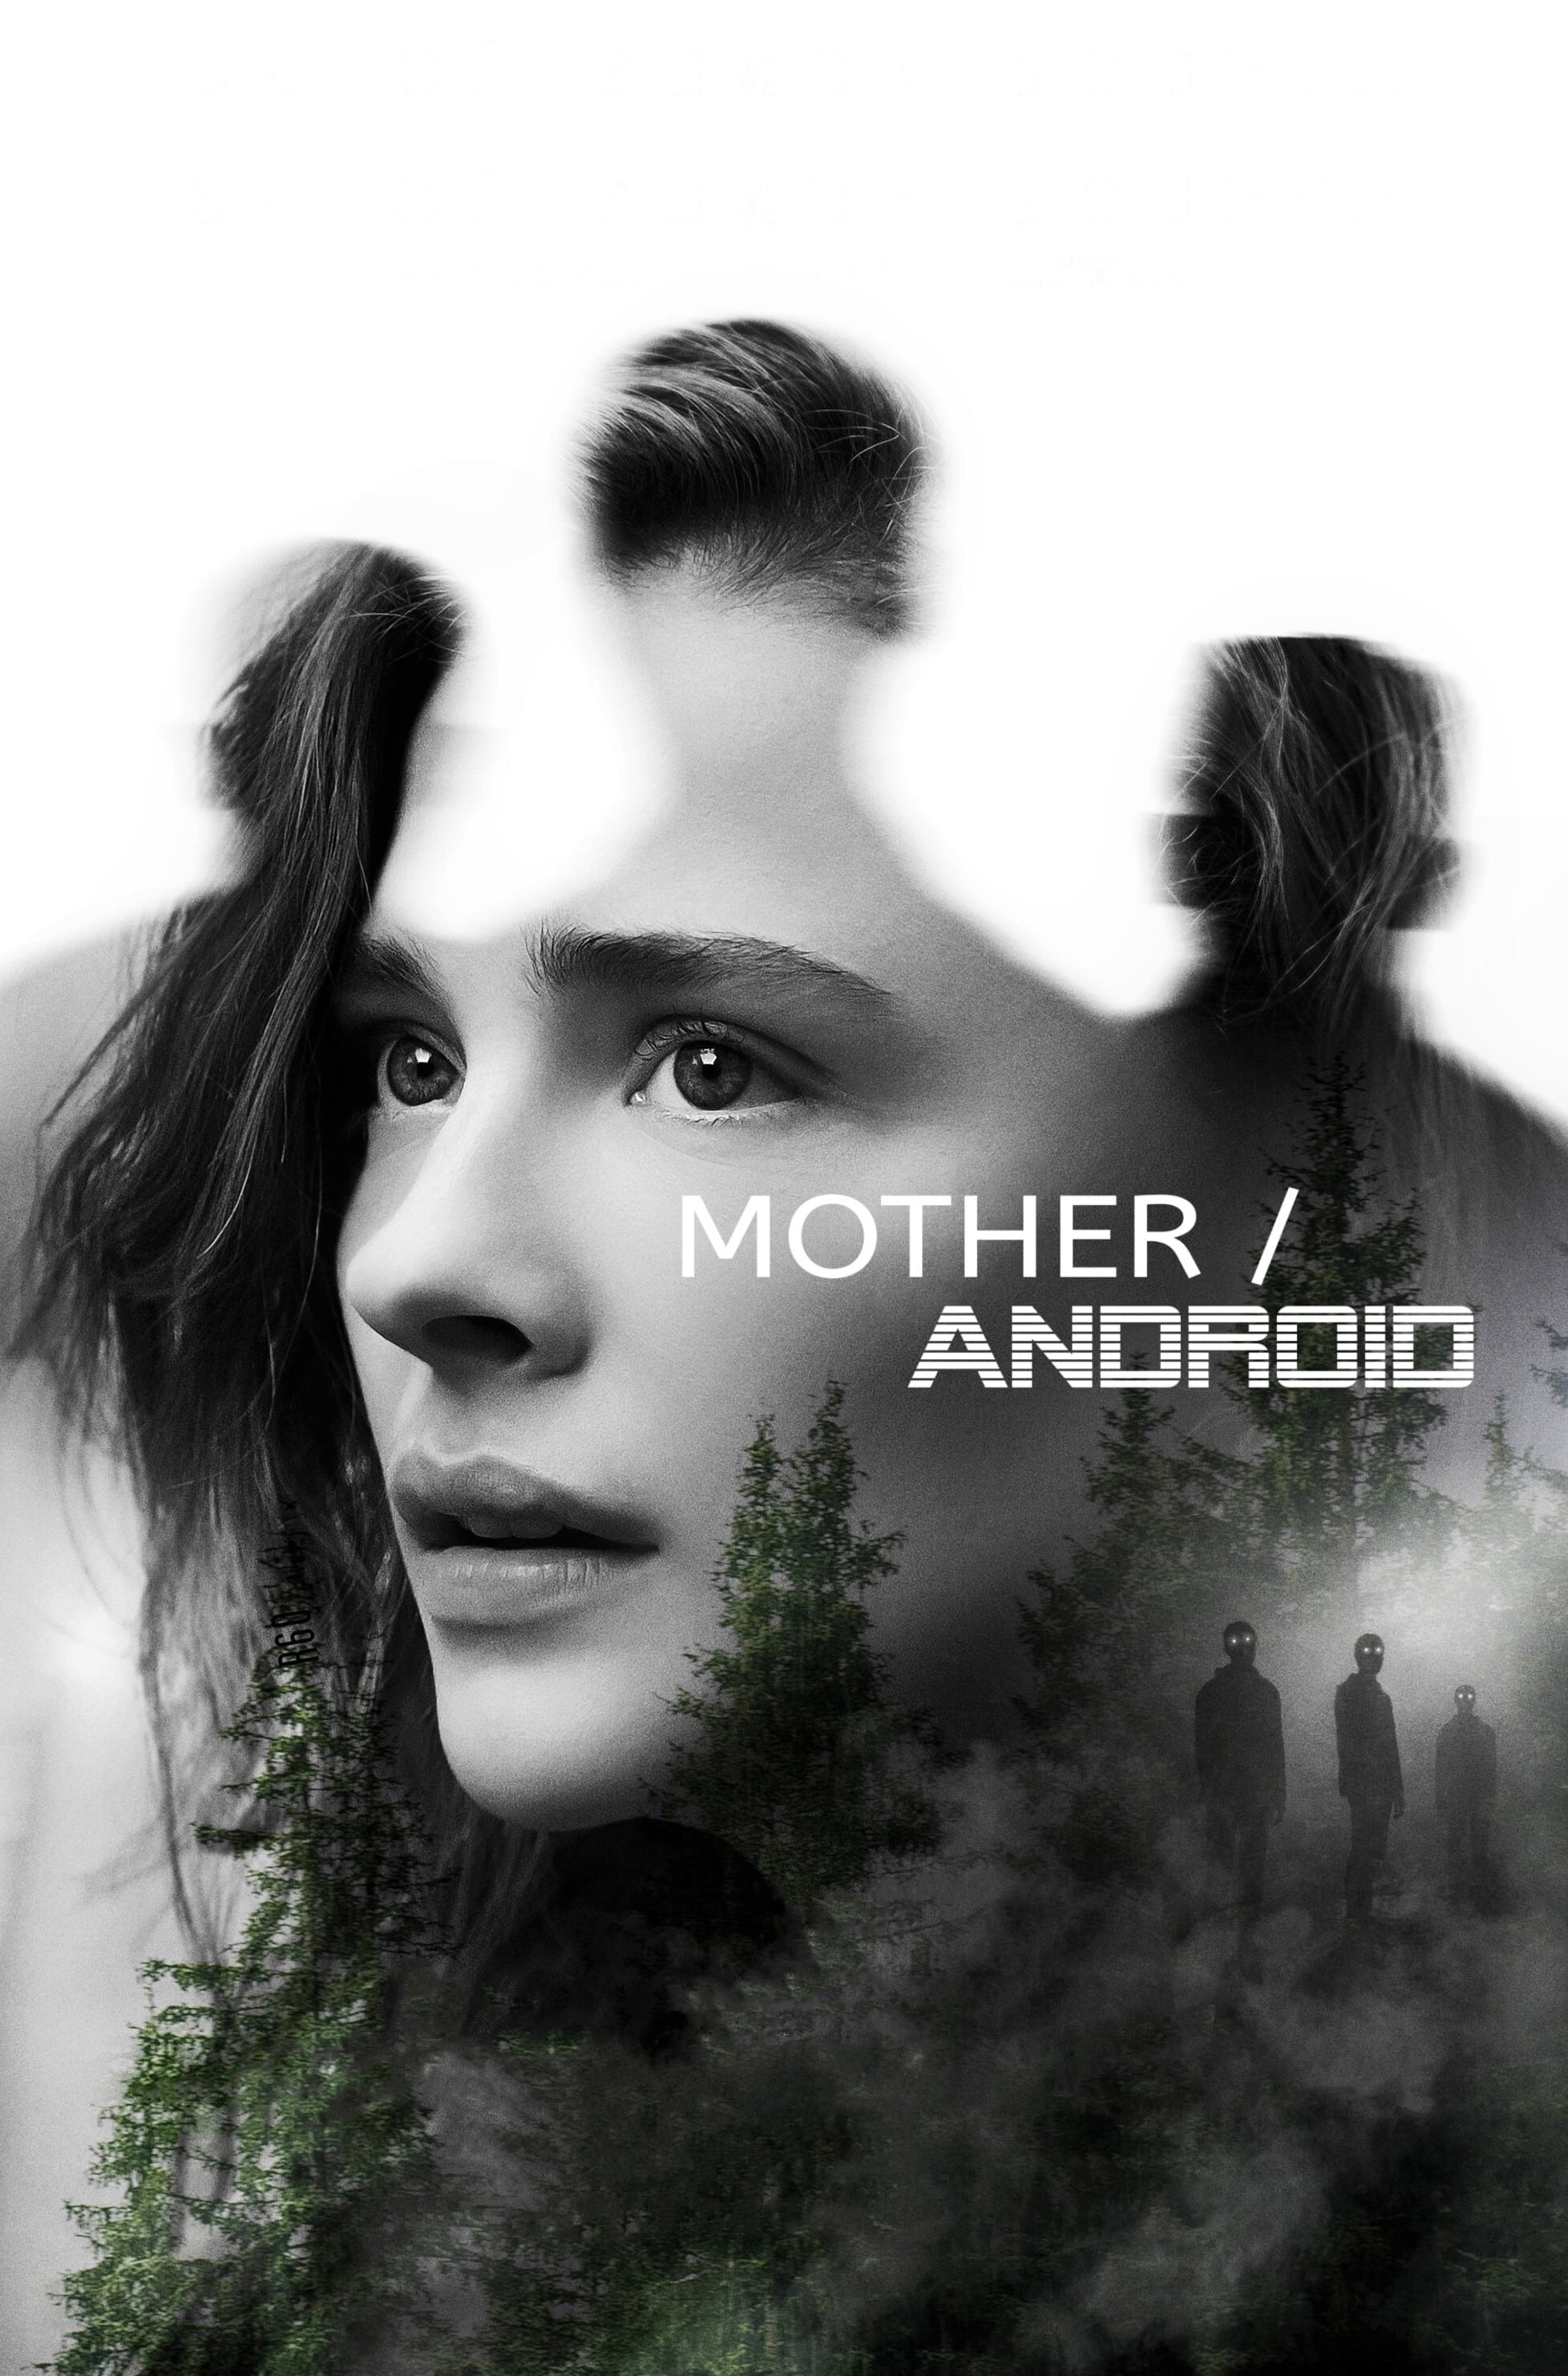 Madre/Androide